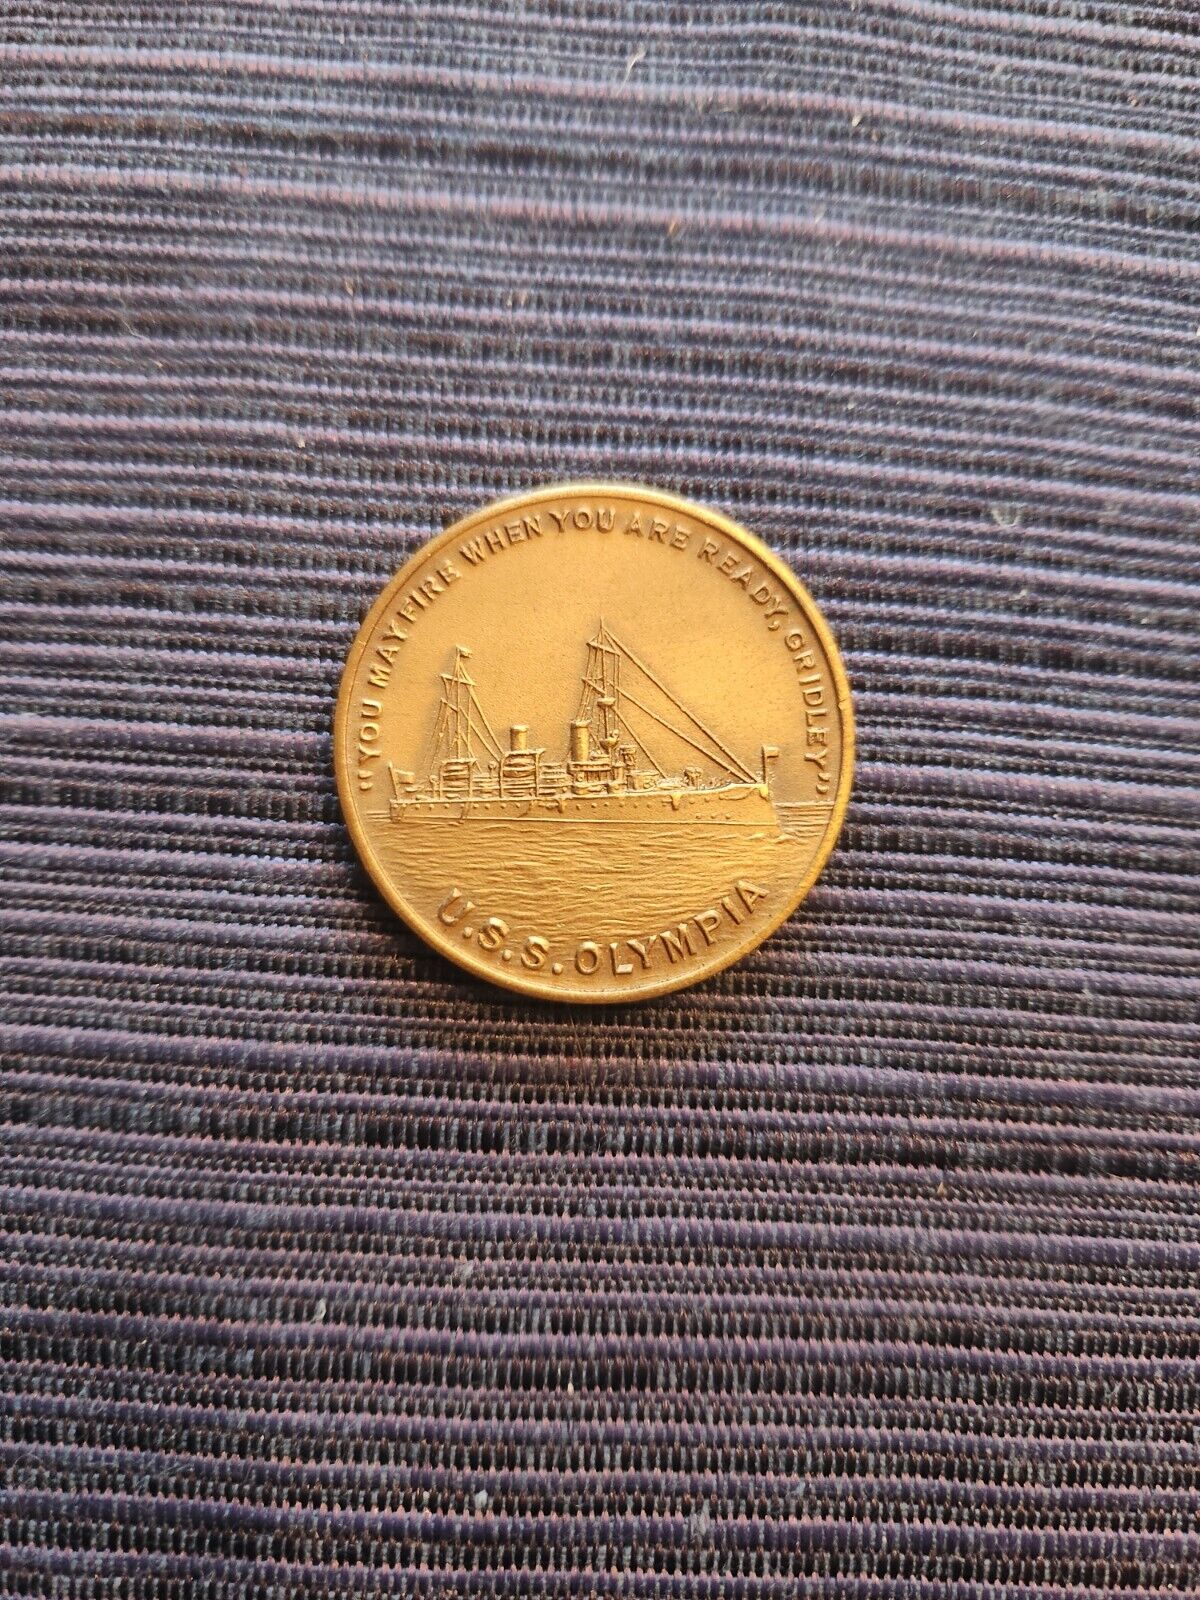 USS Olympia Commemorative Token Medal Made from Propeller of Adm. Dewey’s Ship